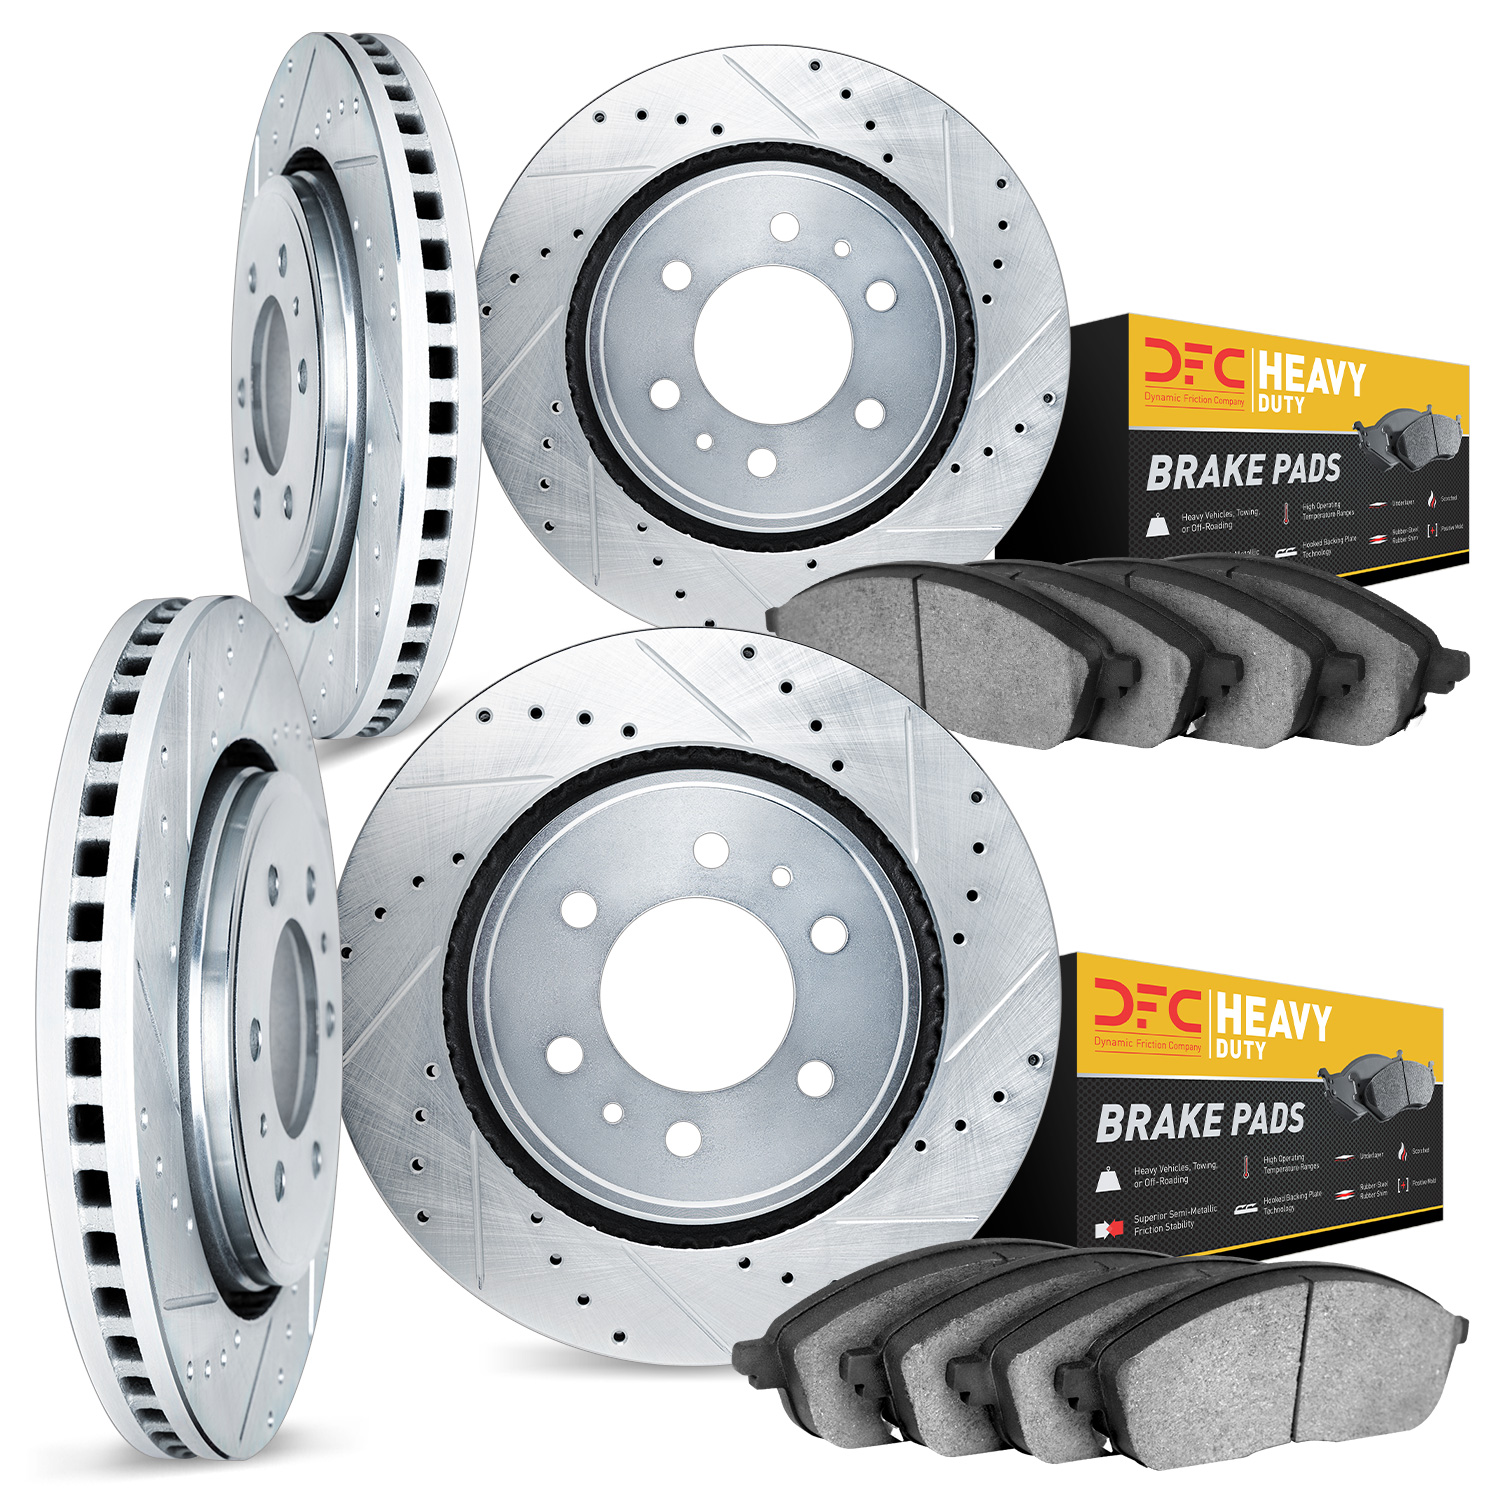 7204-99079 Drilled/Slotted Rotors w/Heavy-Duty Brake Pads Kit [Silver], 2004-2008 Ford/Lincoln/Mercury/Mazda, Position: Front an